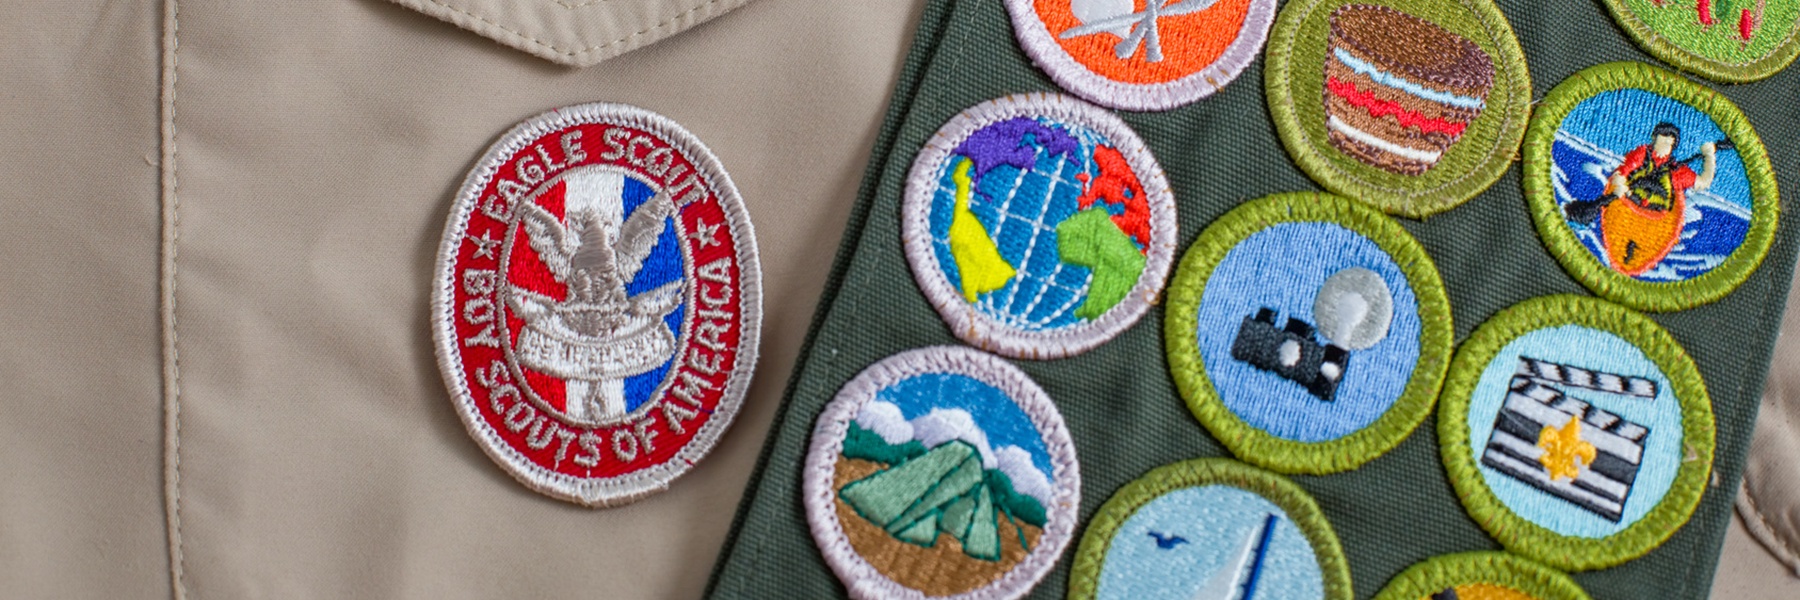 Boy Scout merit badges, including one that says 'Eagle Scout, Boy Scouts of America'